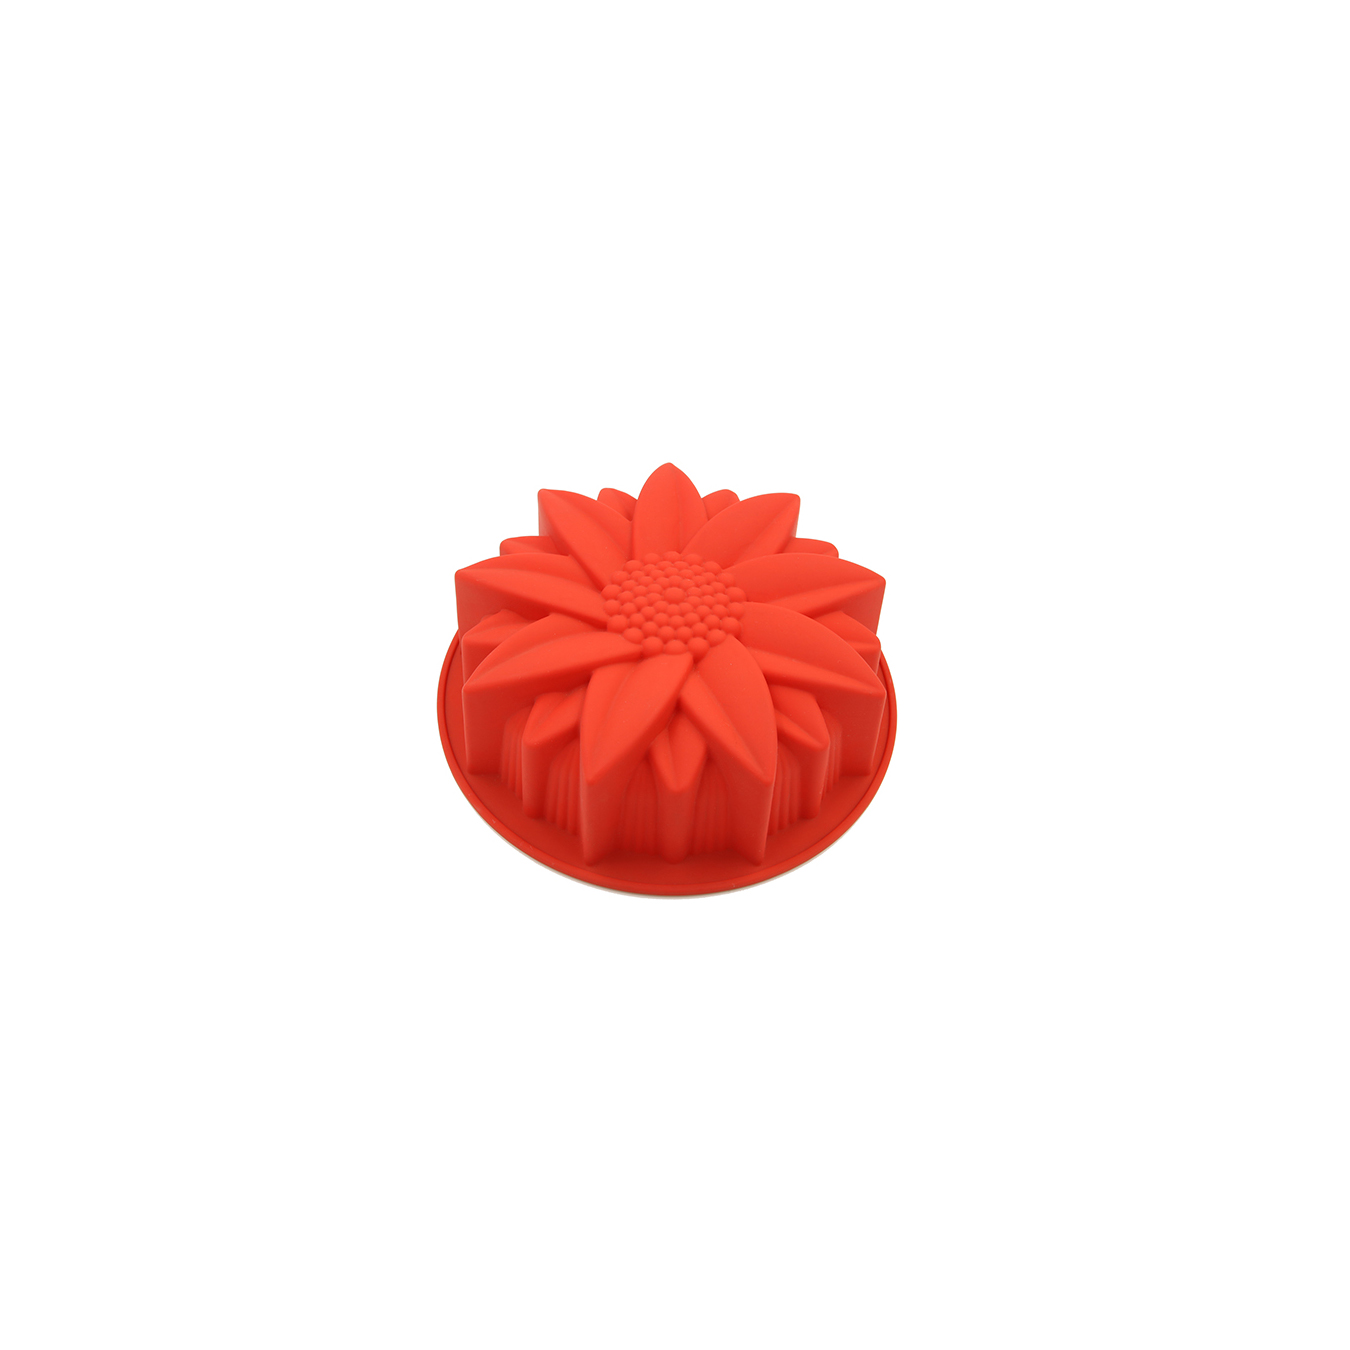 BM064 Sunflower Cake Mould | Silicone Cake Mould In Cooker